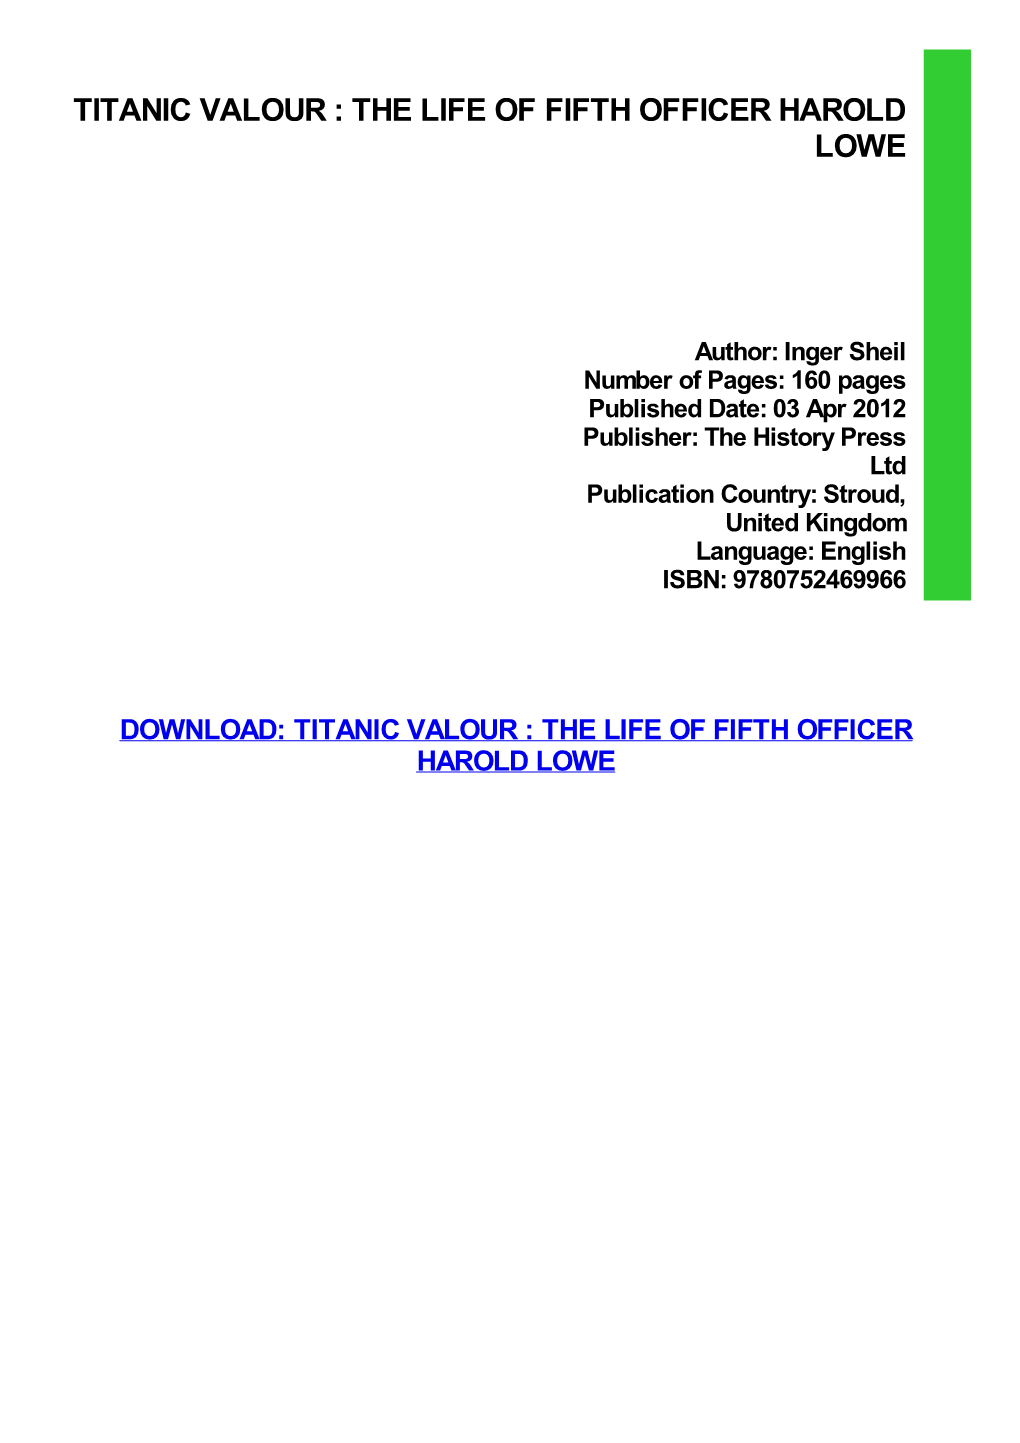 Titanic Valour : the Life of Fifth Officer Harold Lowe